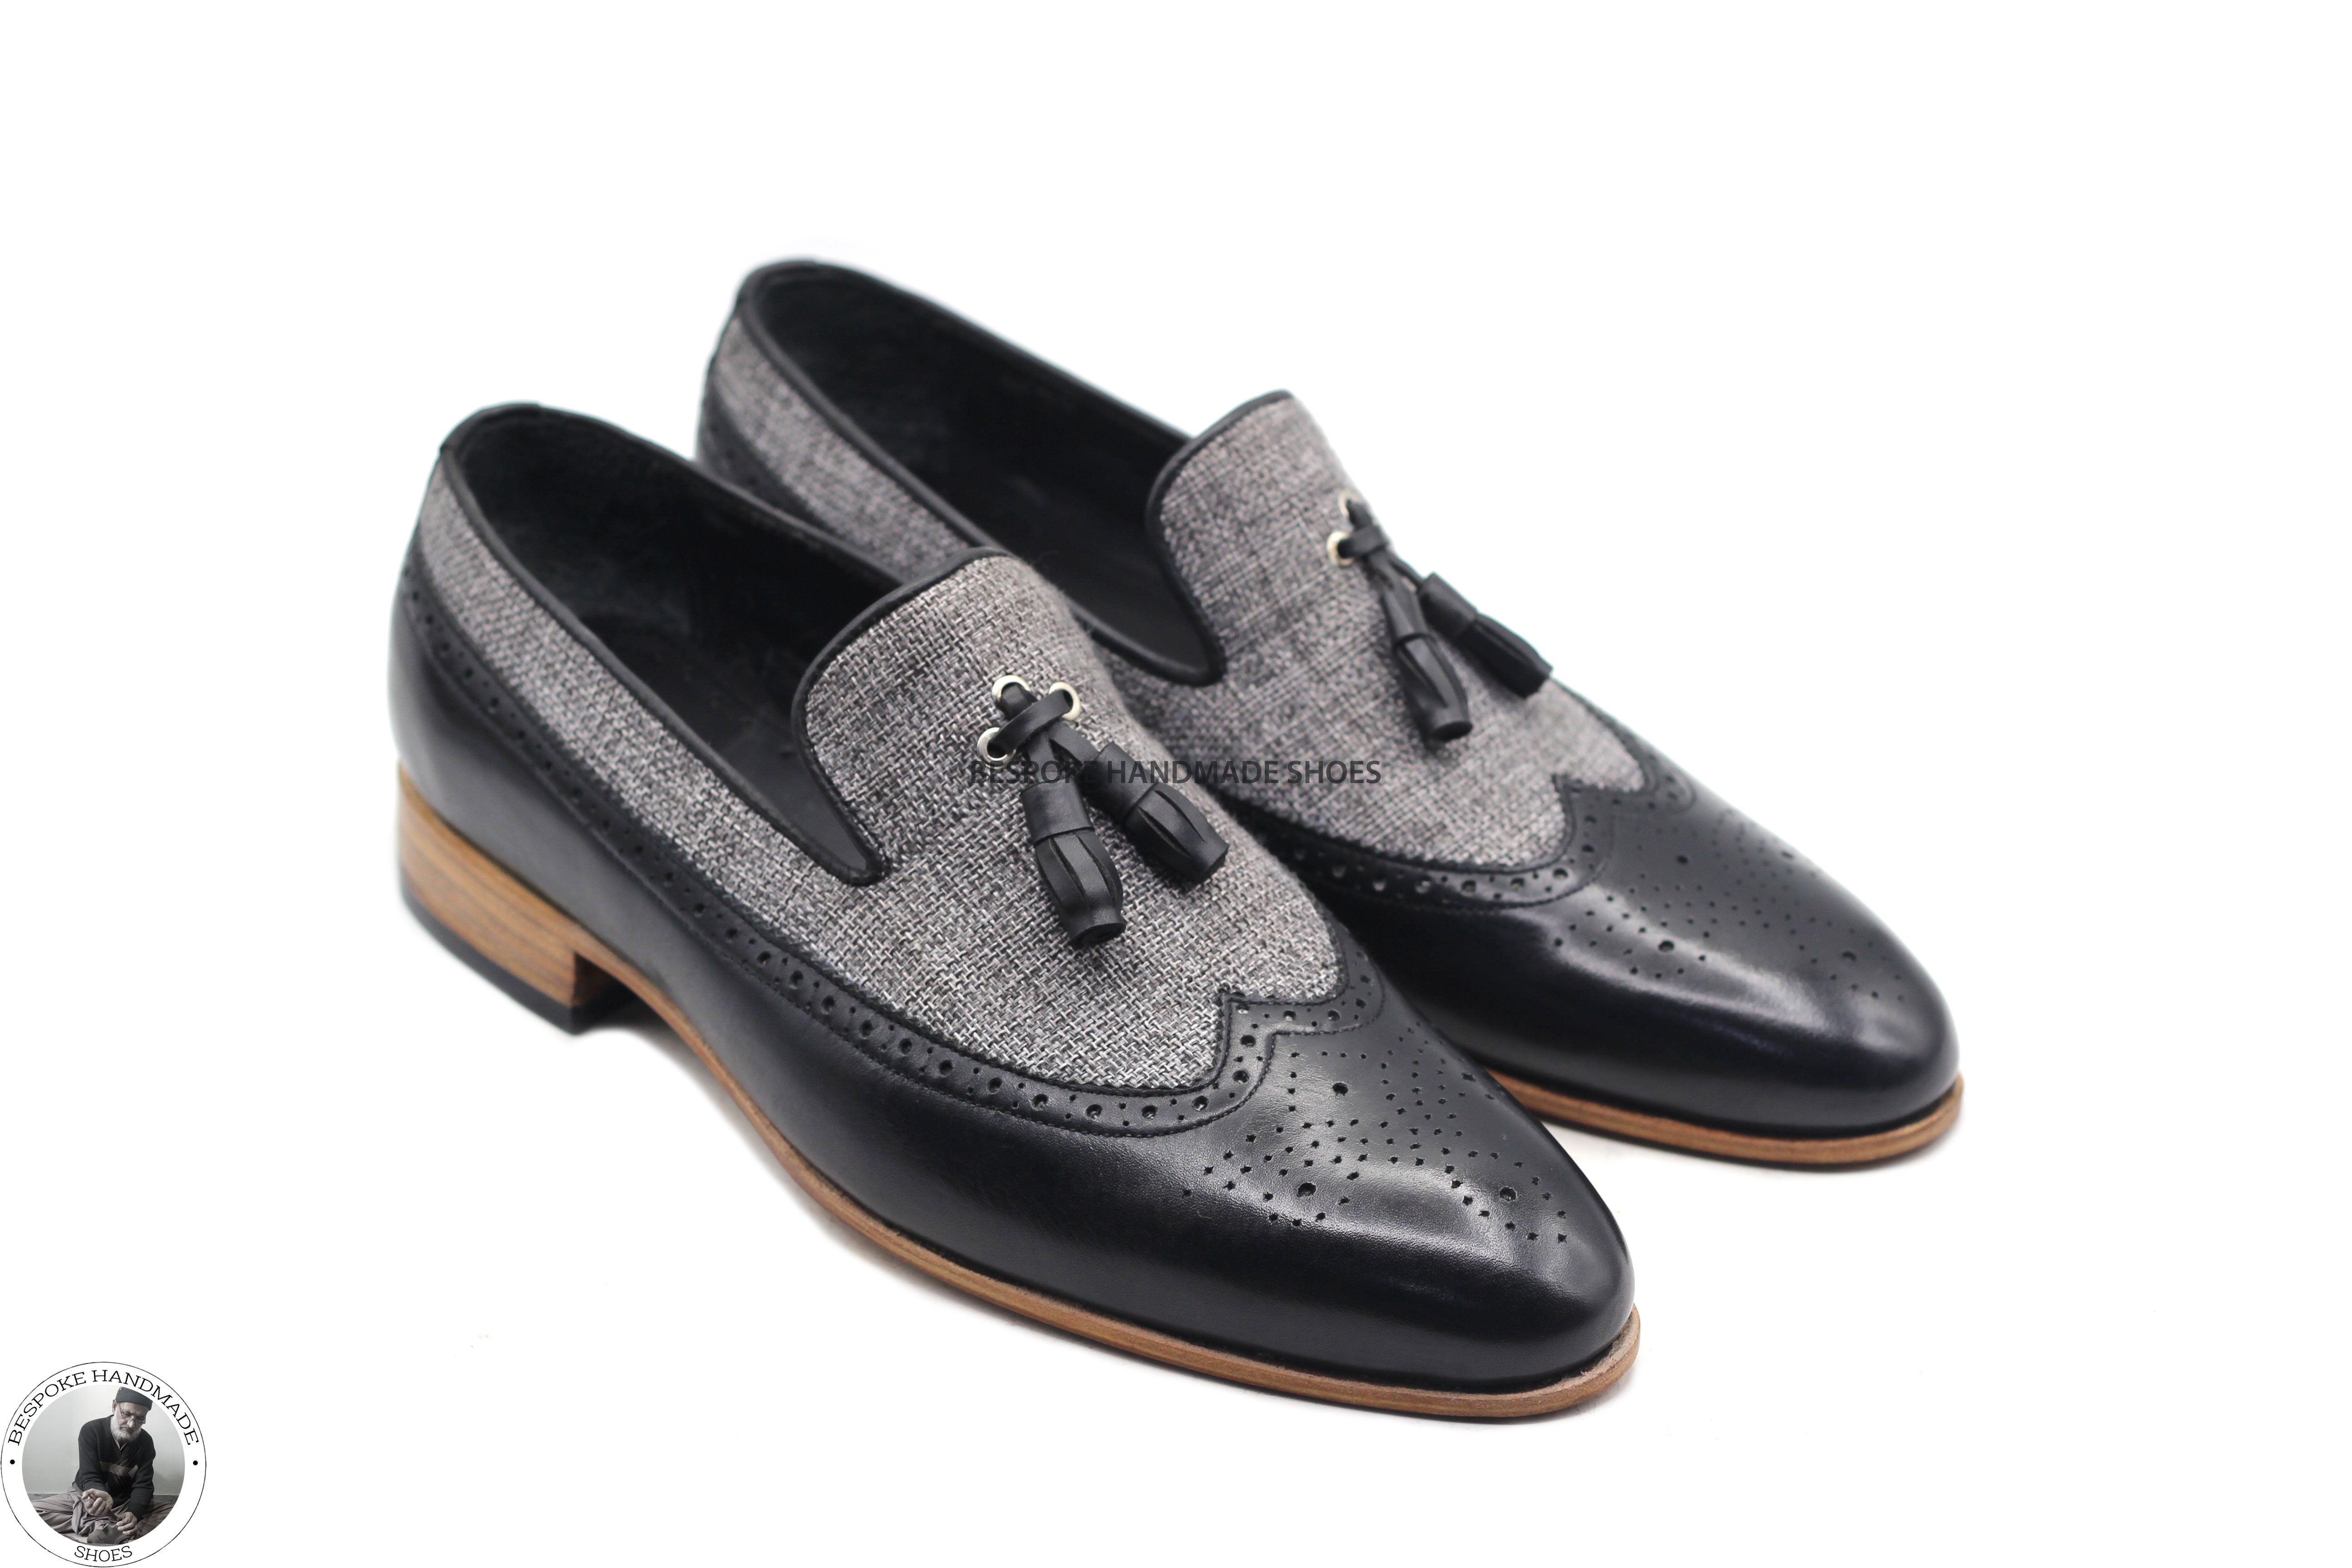 Premium Quality Black Leather & Gray Fabric Moccasin Slip On Leather Tassels Party Wear Men Shoes